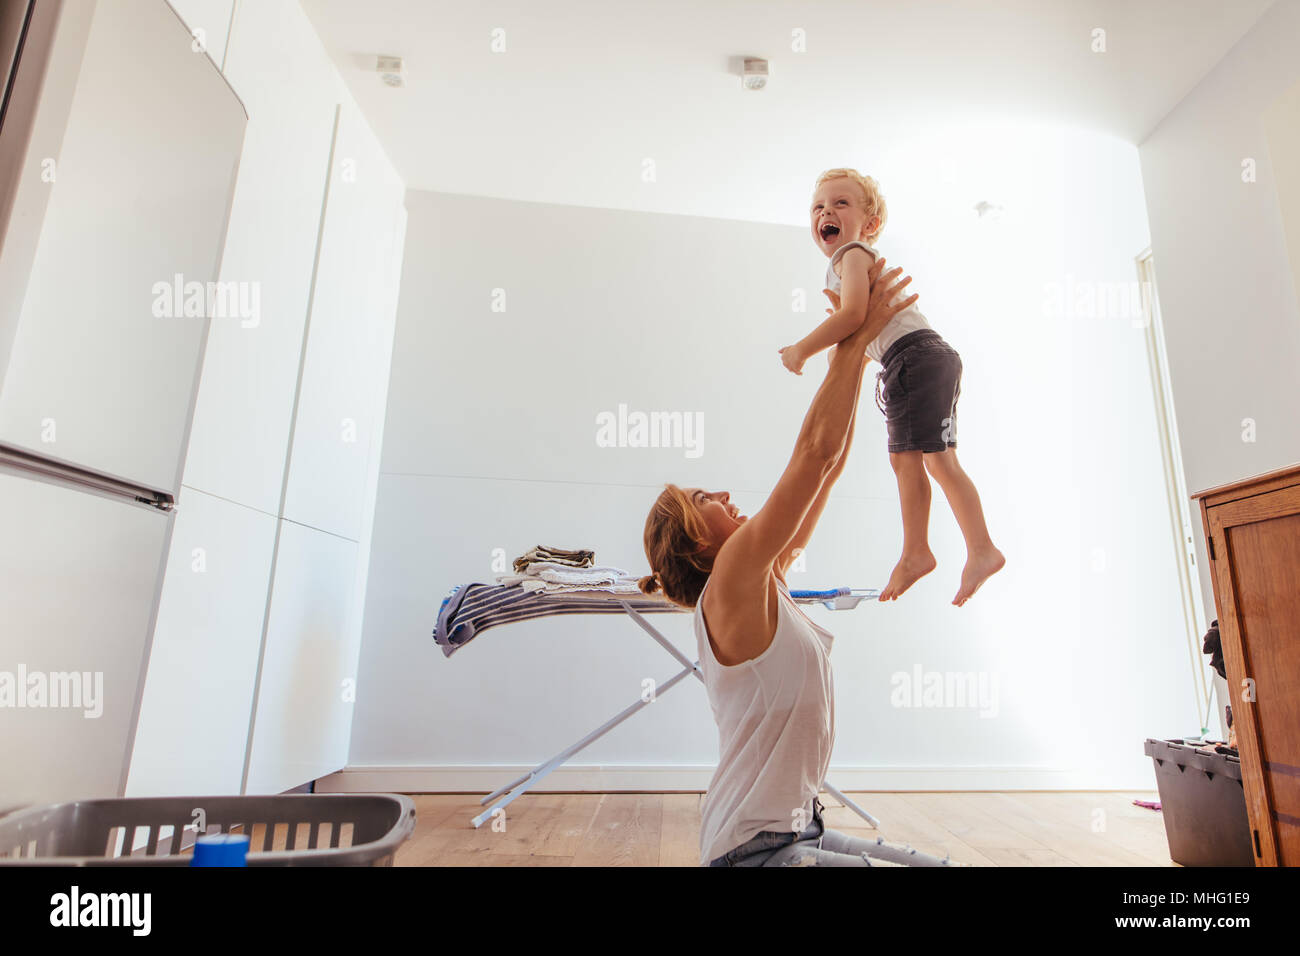 Smiling young woman holding her son in air. Mother and son playing in laundry room. Stock Photo